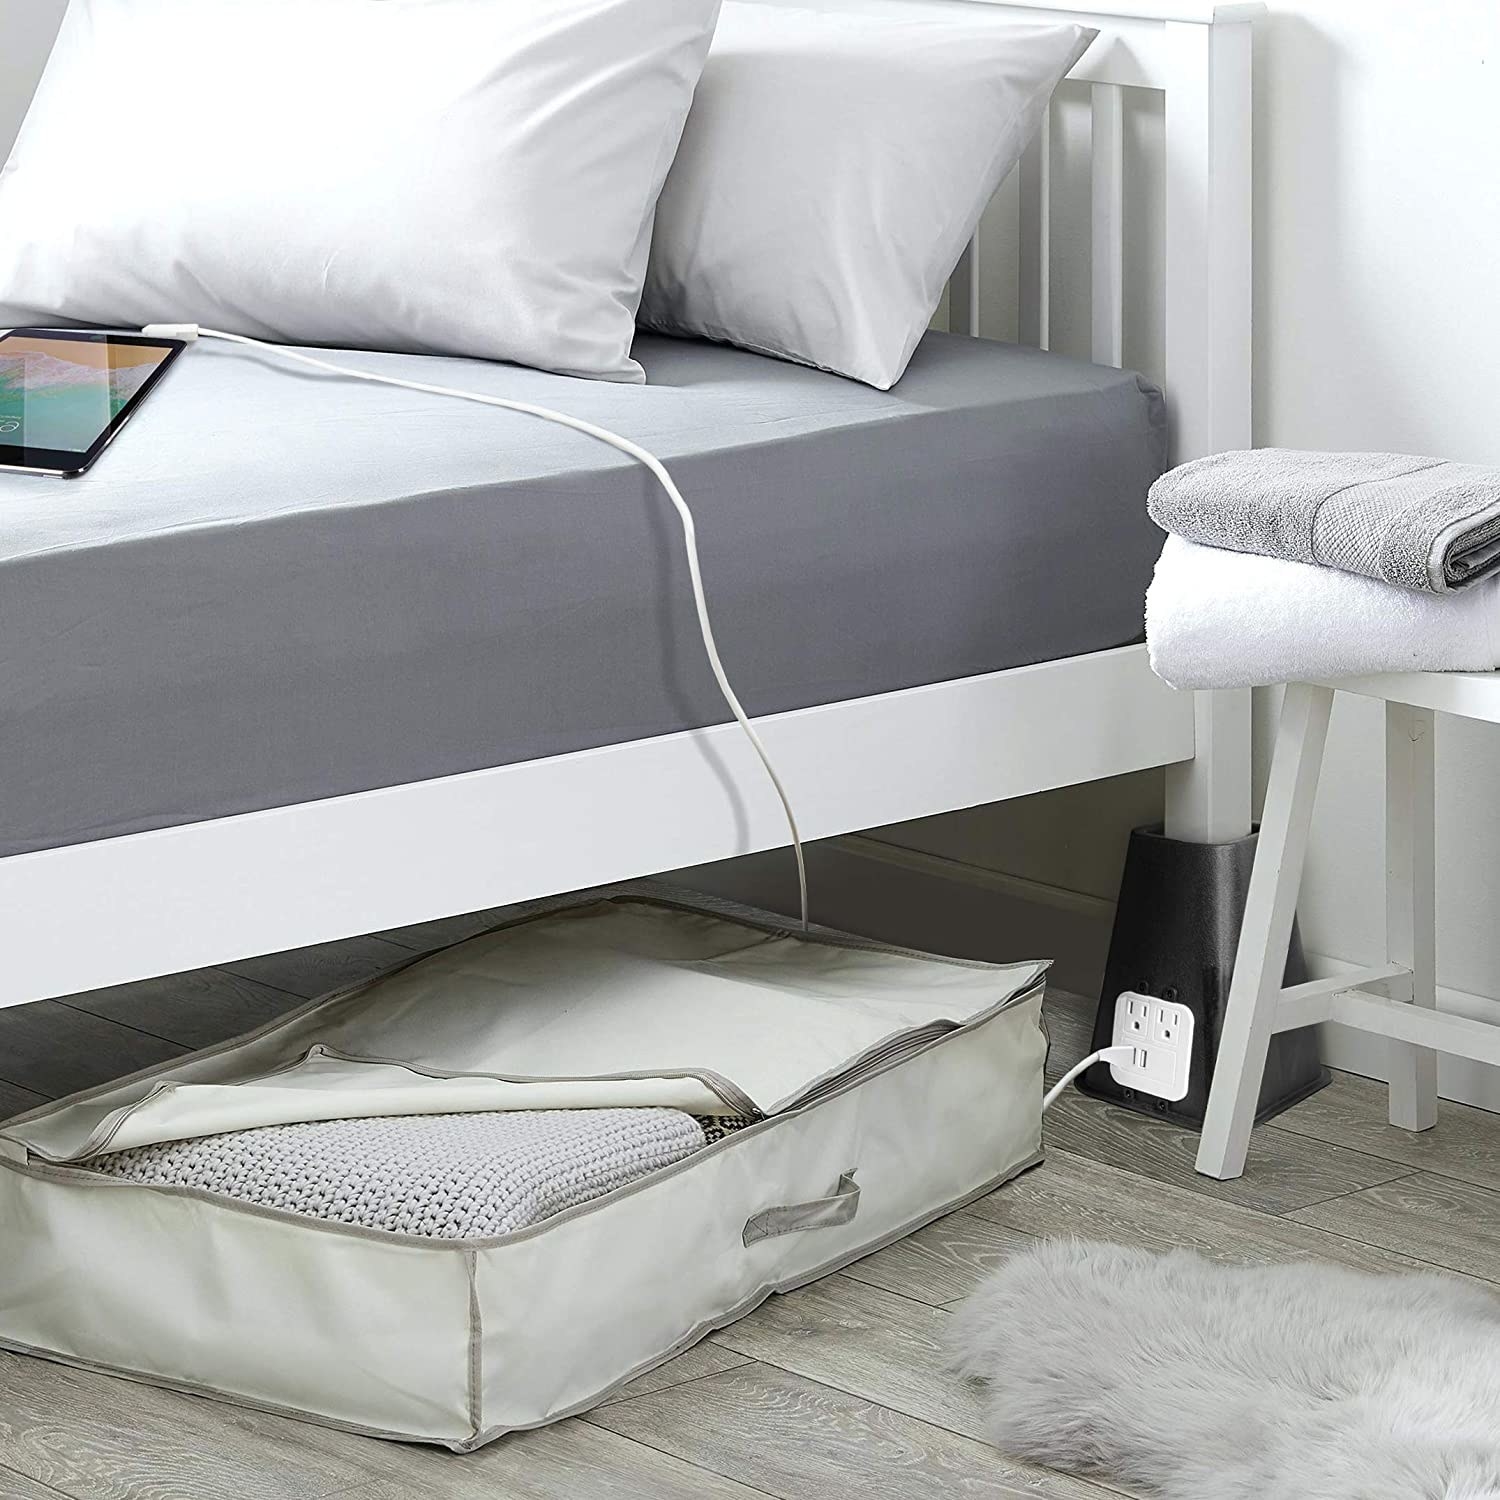 bed riser with two outlets and two USB ports